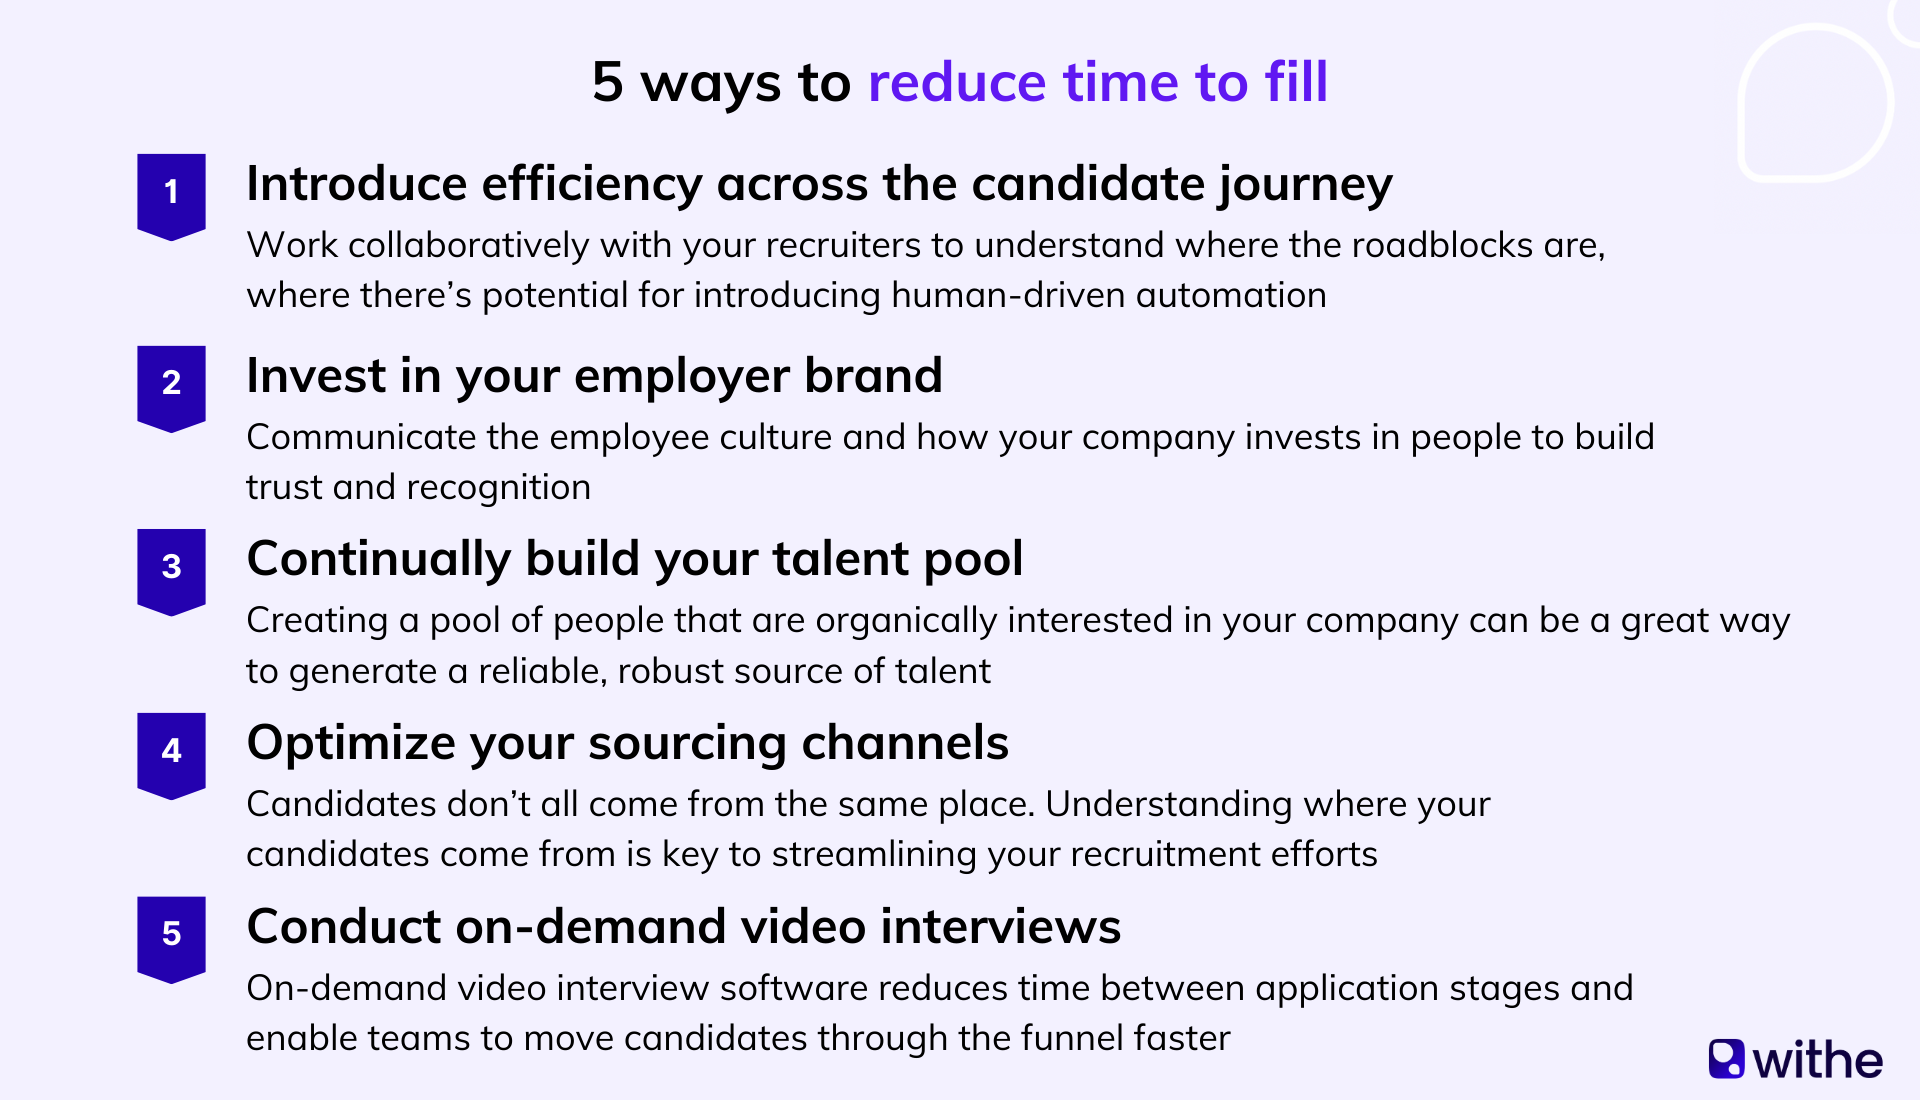 5 ways to reduce time to fill